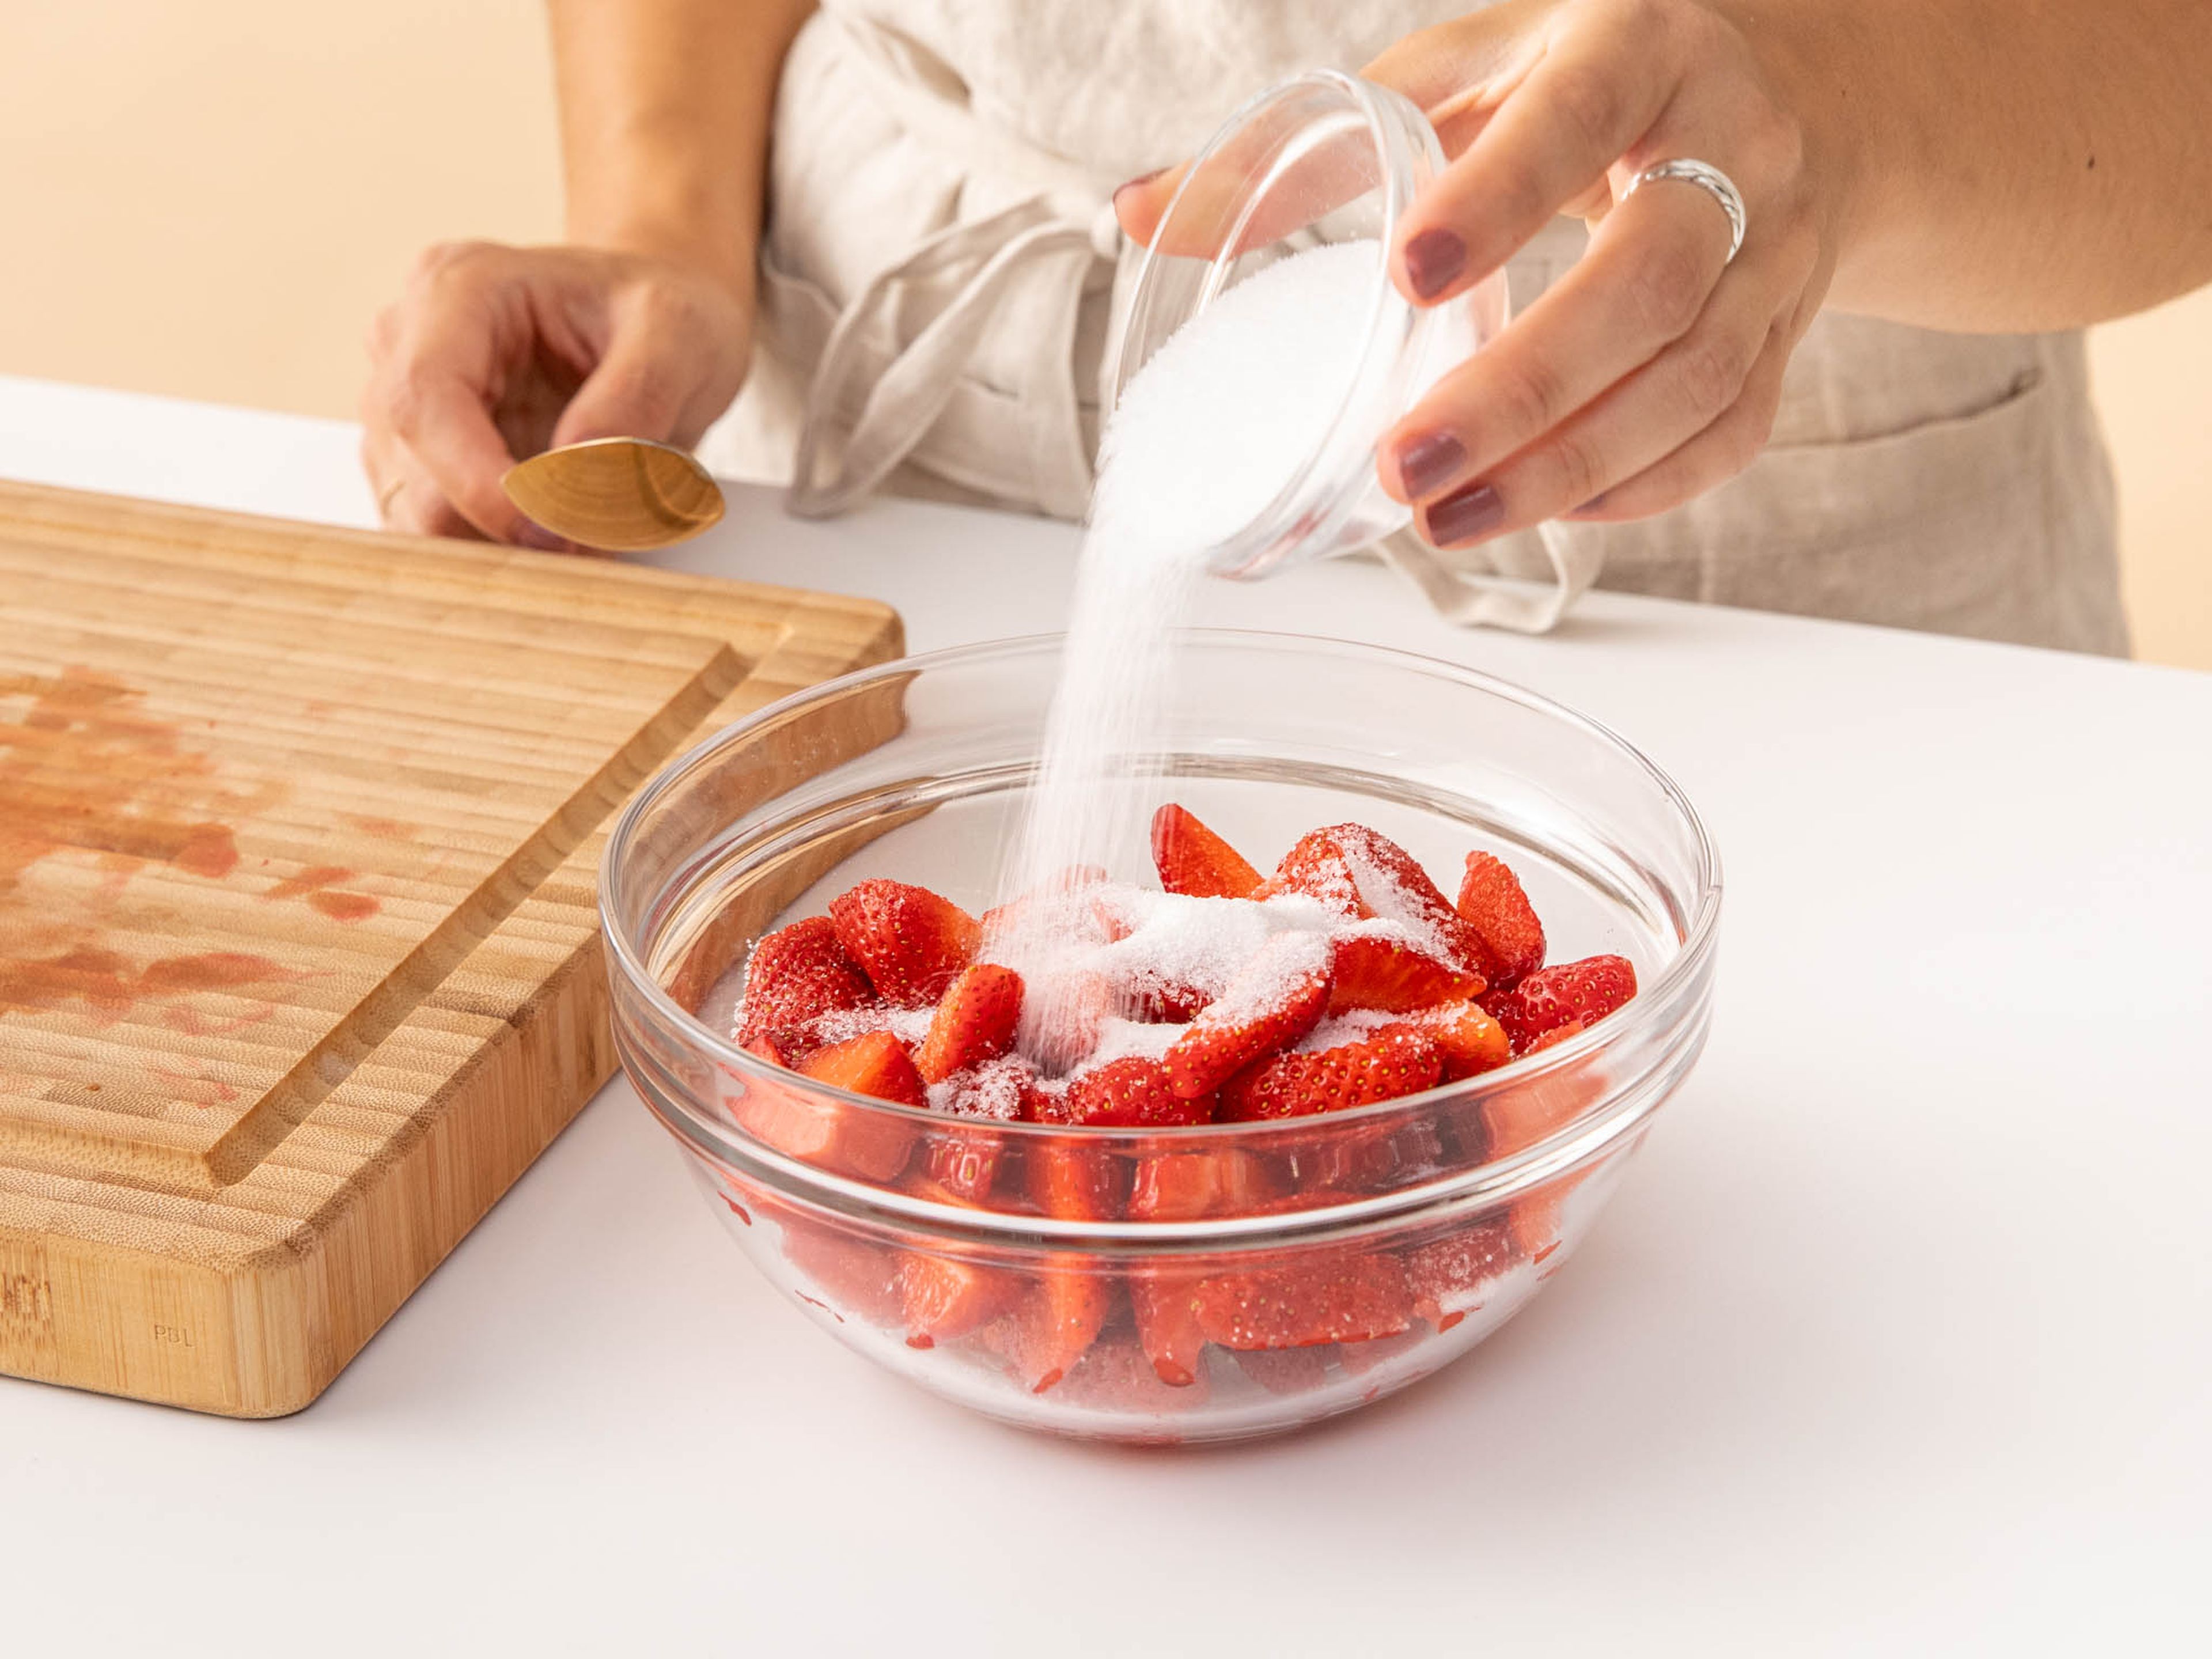 Wash and remove stems from strawberries. Quarter them and toss with half the sugar. Let sit approx. 10 min., or until they turn glossy as pie filling and release some of their juices.